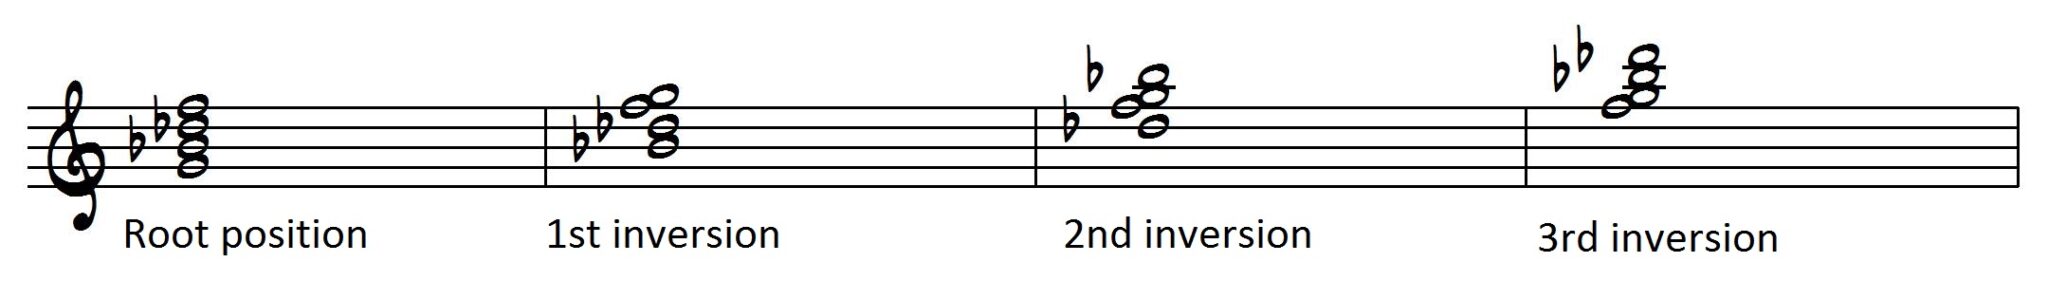 Half-diminished chord in root position, first inversion, second inversion, and third inversion